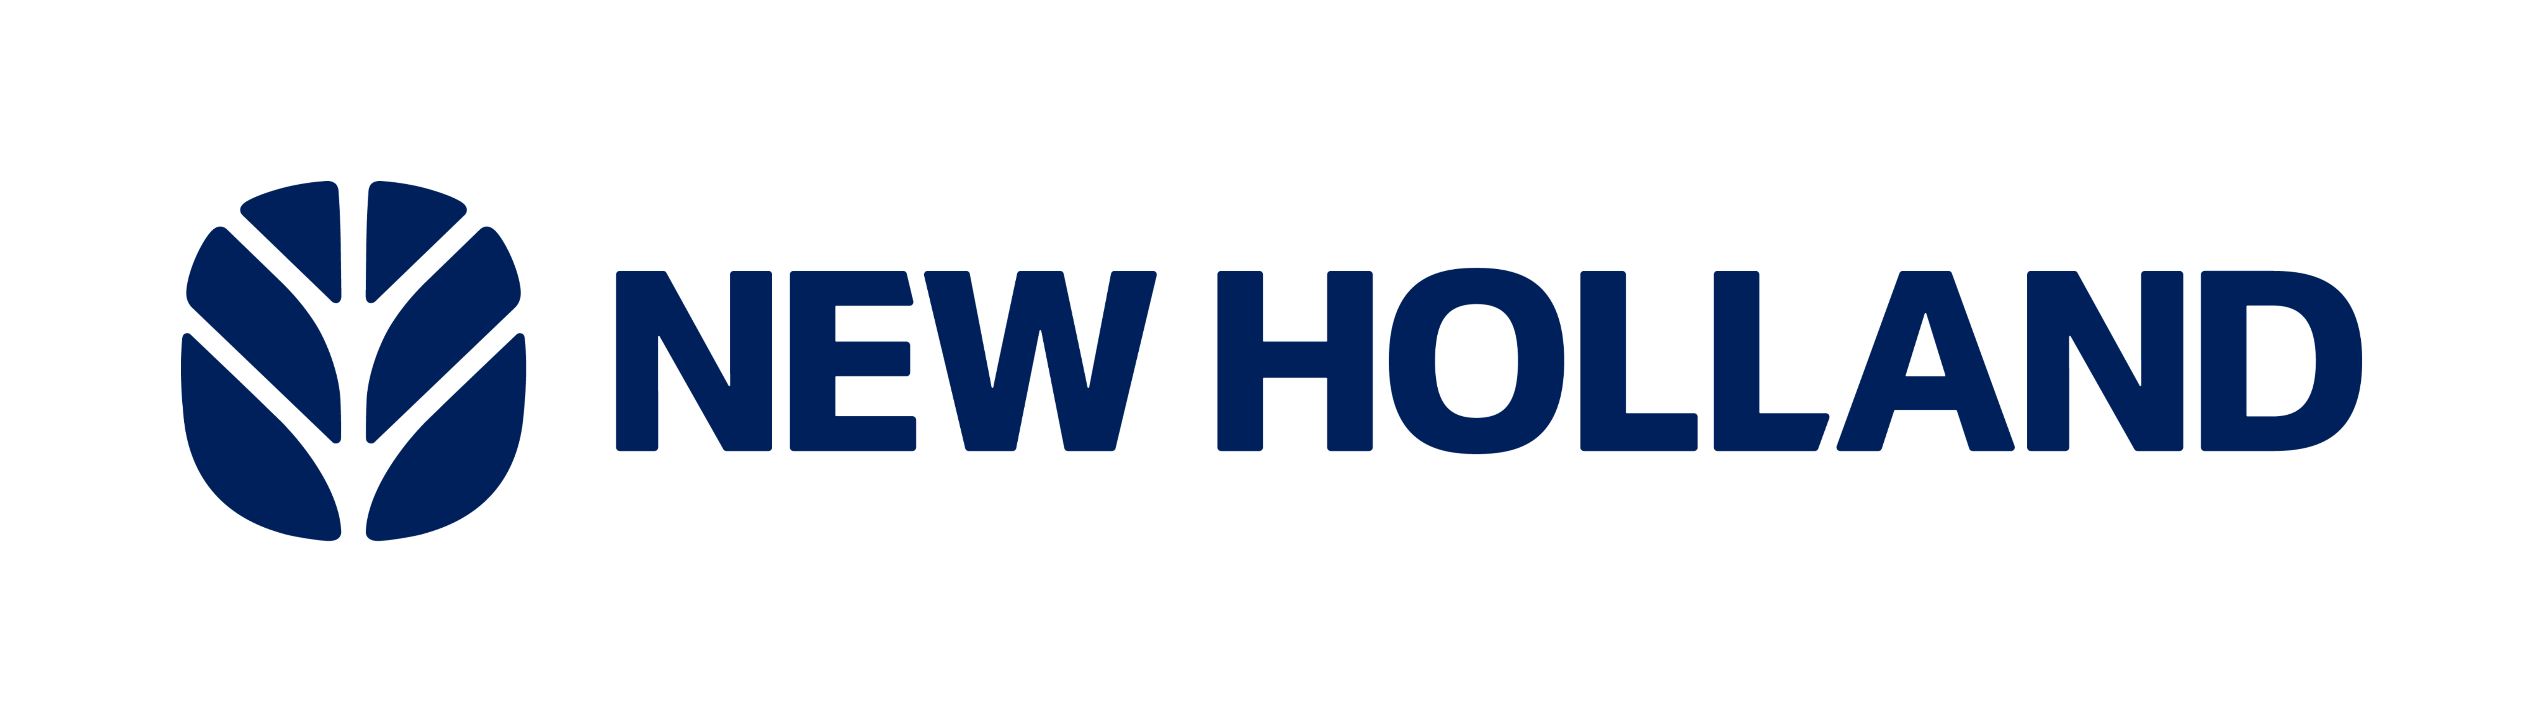 Connectivity partners - New Holland